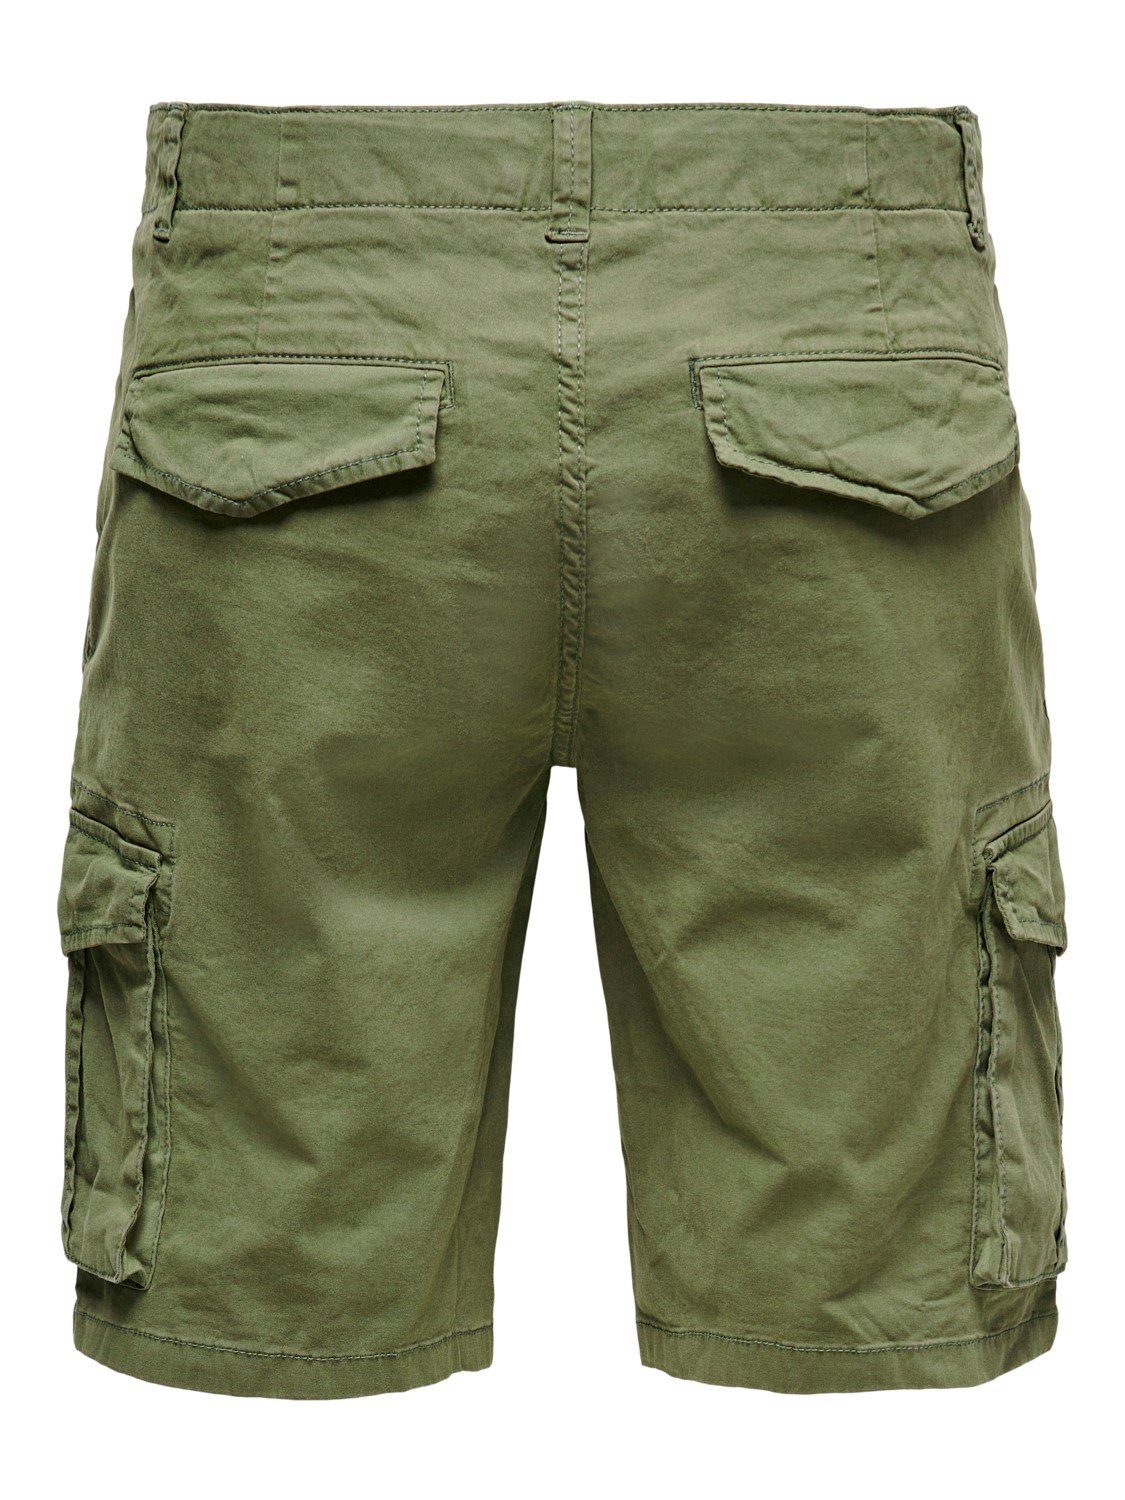 ONLY & SONS Shorts Night Olive 22021459 Stretch mit ONSMIKE